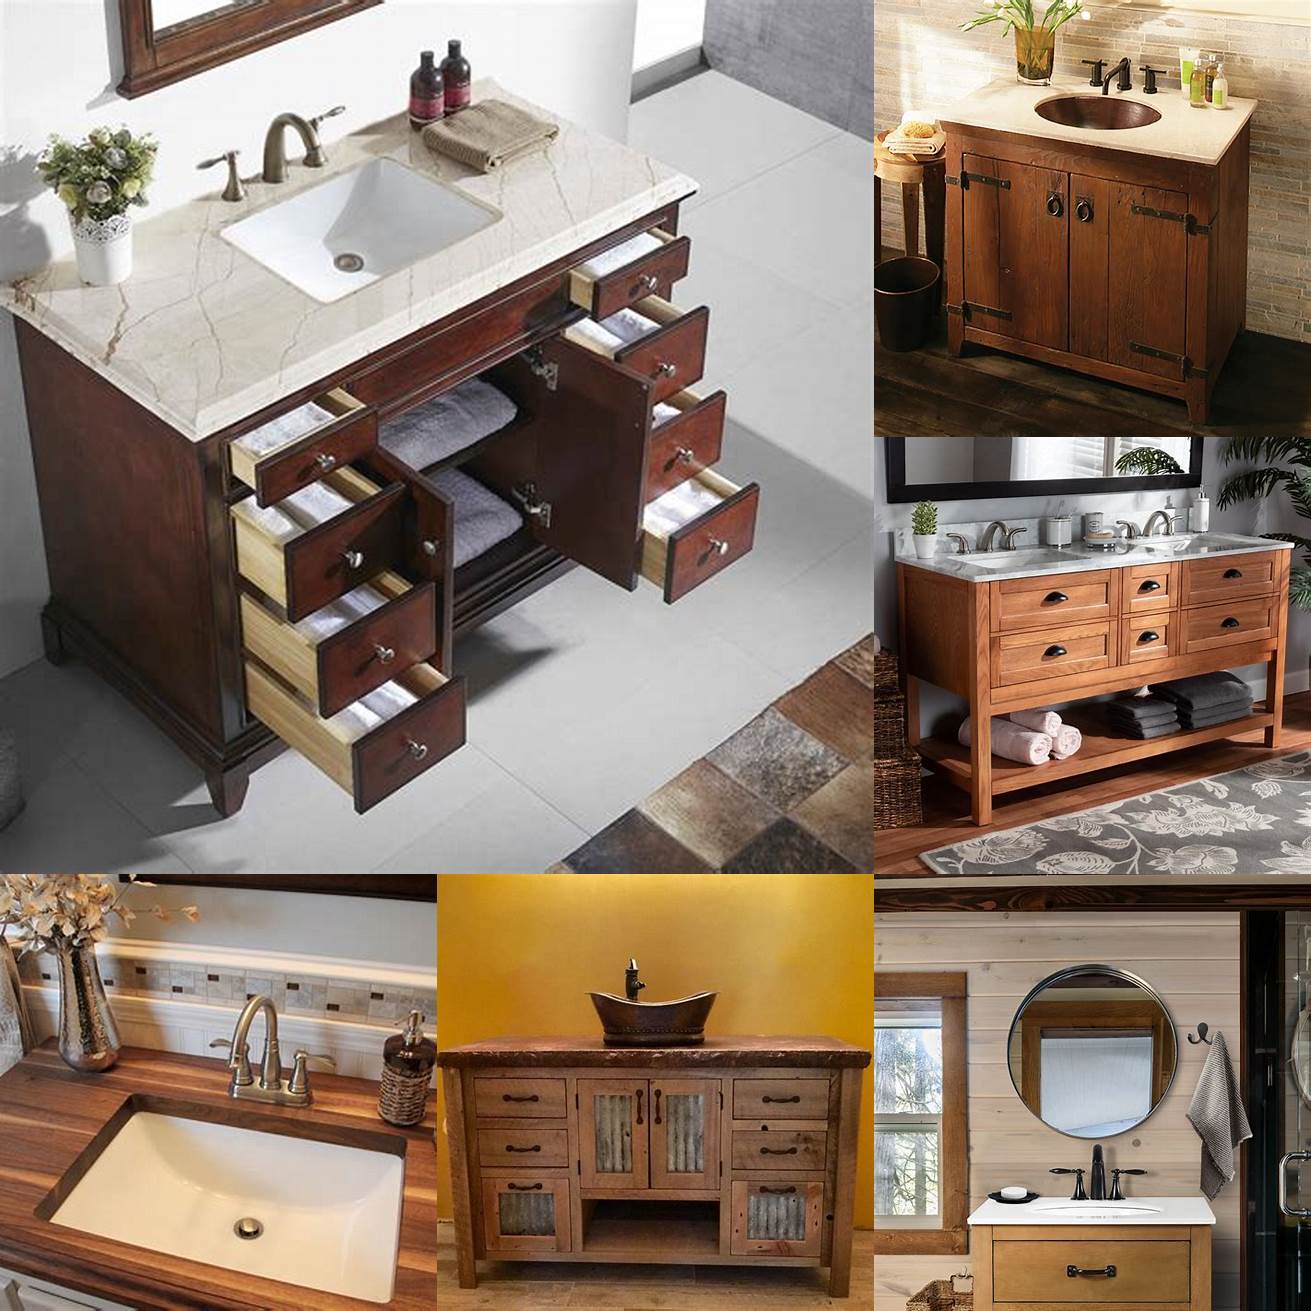 Wood A popular choice for bathroom vanity bases wood adds warmth and texture to your bathroom design However it requires regular maintenance to prevent water damage and warping